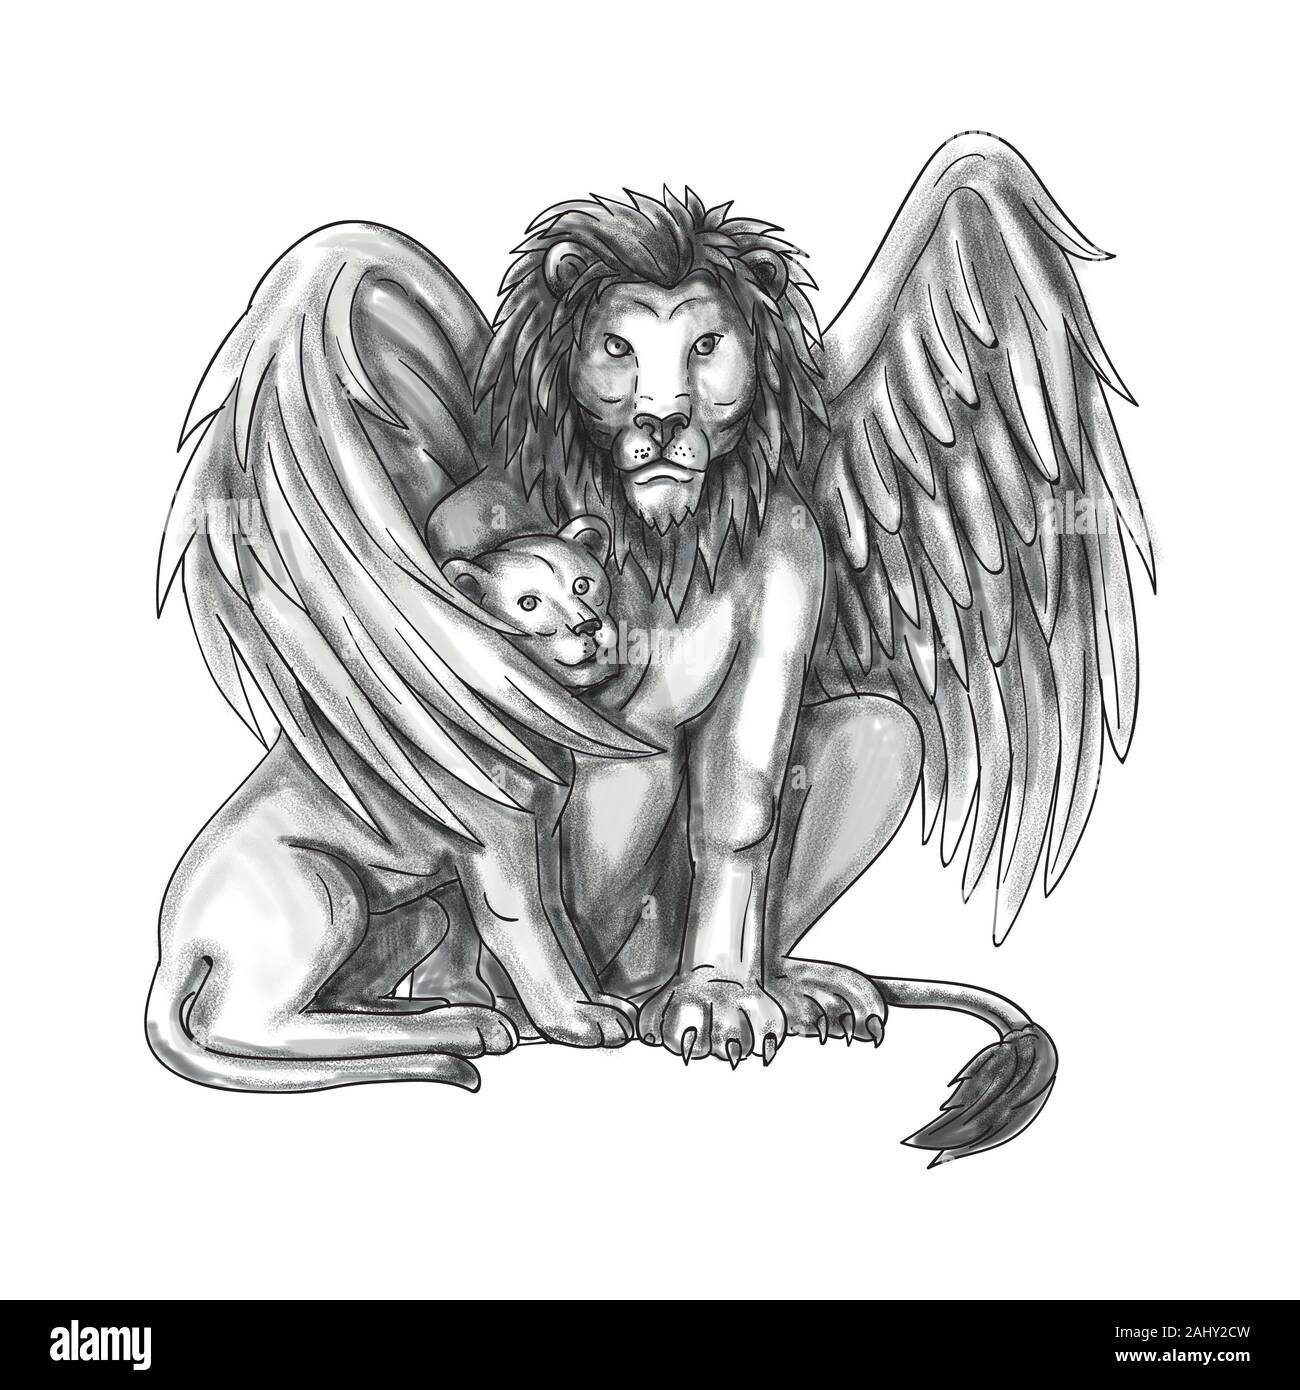 Tattoo style illustration of a winged lion, a mythological creature that resembles a lion with bird-like wings, protecting its cub by putting it Stock Photo